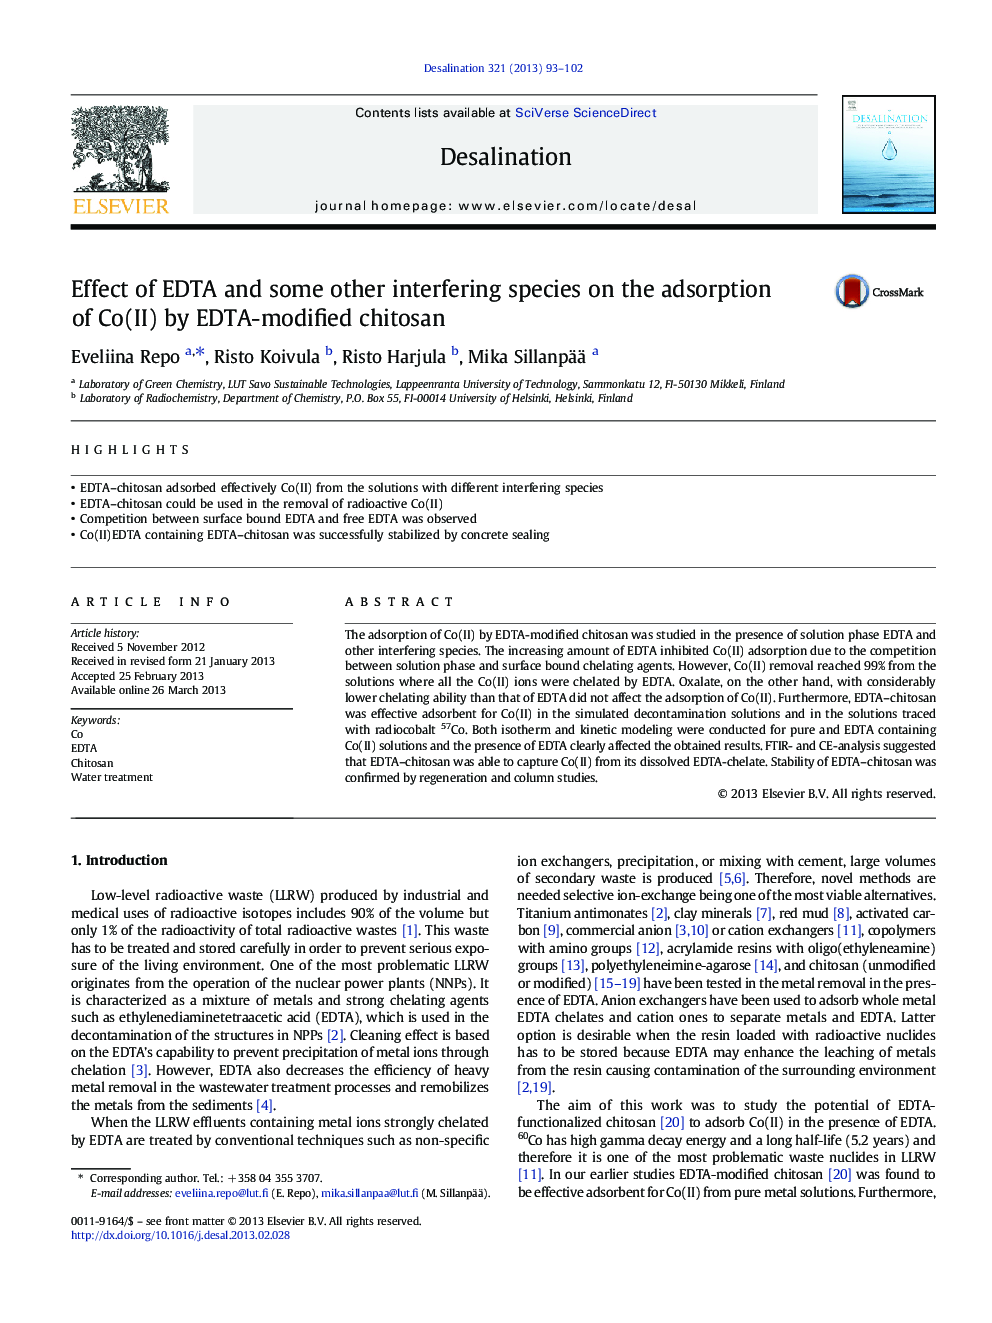 Effect of EDTA and some other interfering species on the adsorption of Co(II) by EDTA-modified chitosan